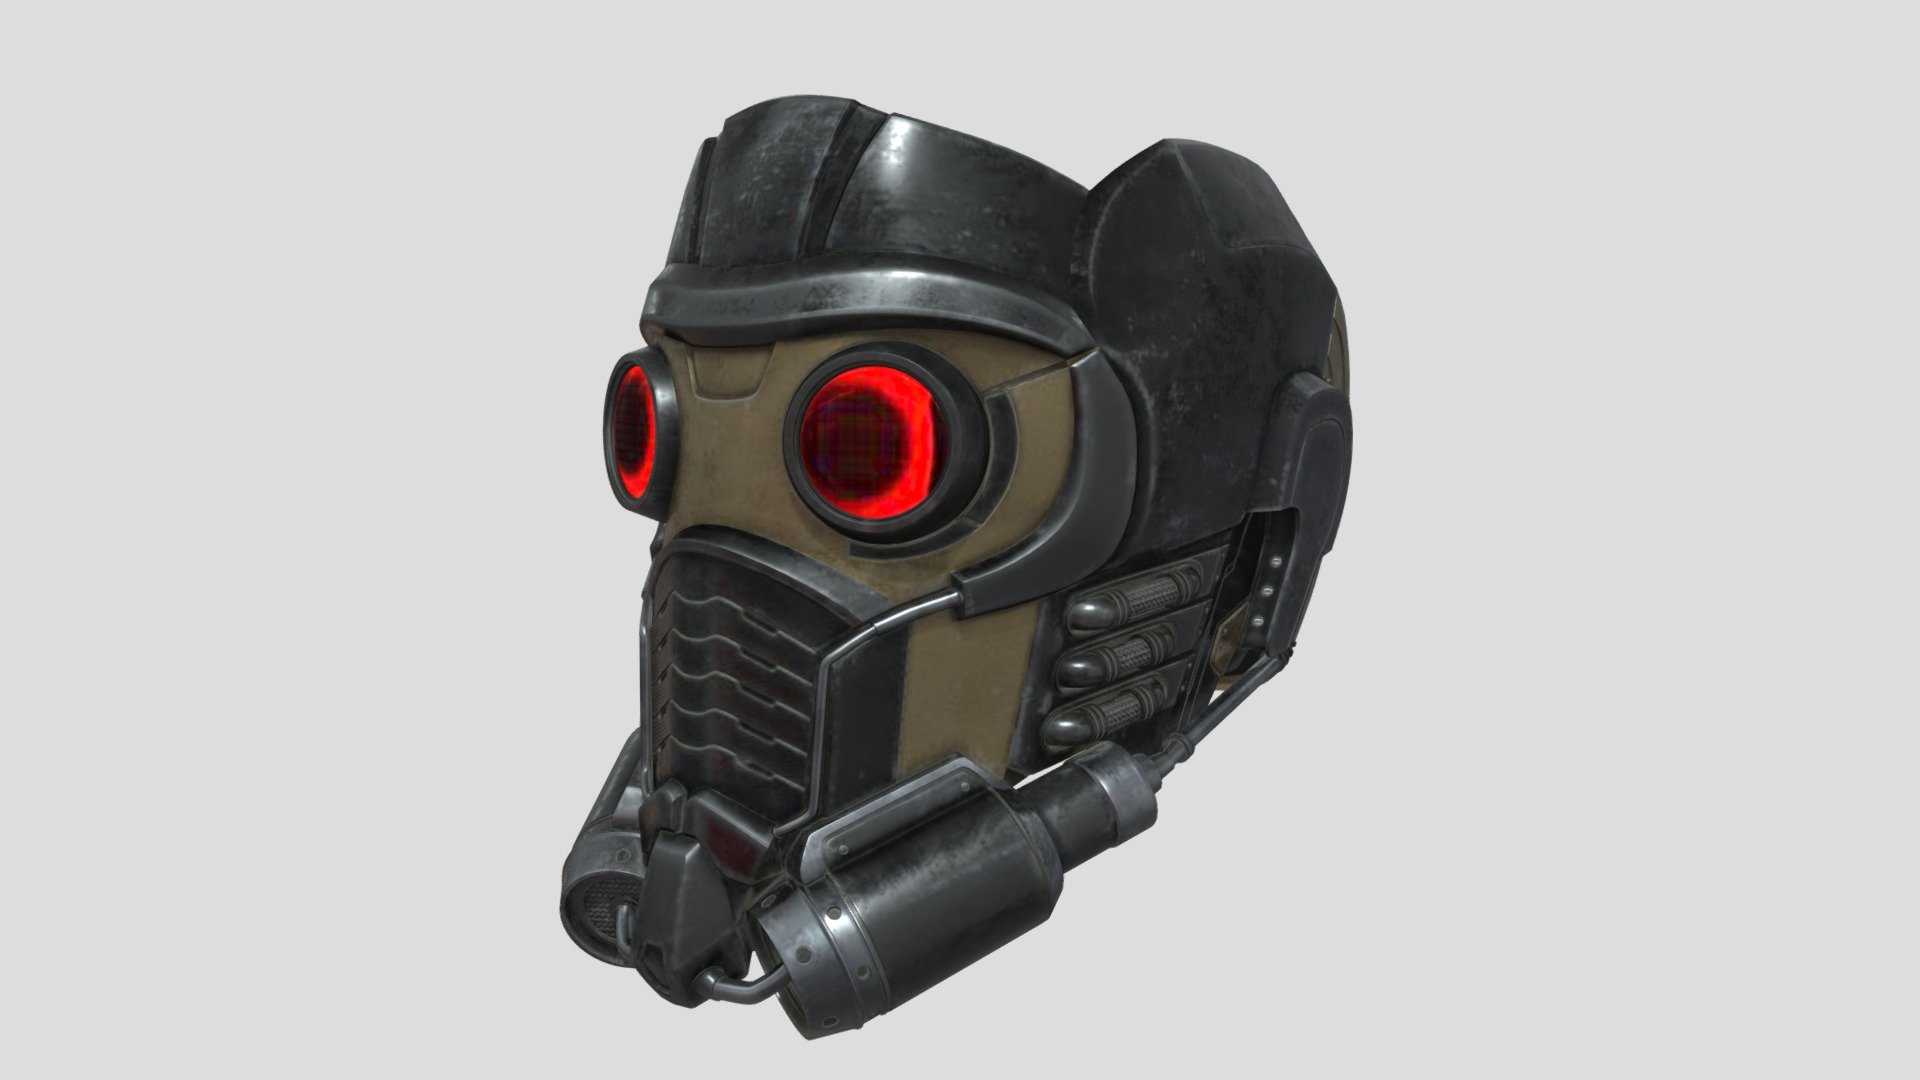 Star- Lord Mask
The model has an optimized low poly mesh with the greatest possible number of simplifications that do not affect photo-realism but can help to simplify it, thus lightening your scene and allowing for using this model in real-time 3d applications.

Real-world accurate model.  In this product, all objects are ERROR-FREE and All LEGAL Geometry. Subdivisions are not required for this product.

Perfect for Architectural, Product visualization, Game Engine, and VR (Virtual Reality) No Plugin Needed.

Format Type




3ds Max 2017 (standard shader)

FBX

OBJ

3DS

Texture

1 material used. 1 different sets of textures:




Diffuse

Normal

Specular

Gloss

Emissive

Specular n Gloss [.tga additional texture]

You might need to re-assign textures map to model in your relevant software - Star- Lord Mask - Buy Royalty Free 3D model by luxe3dworld 3d model